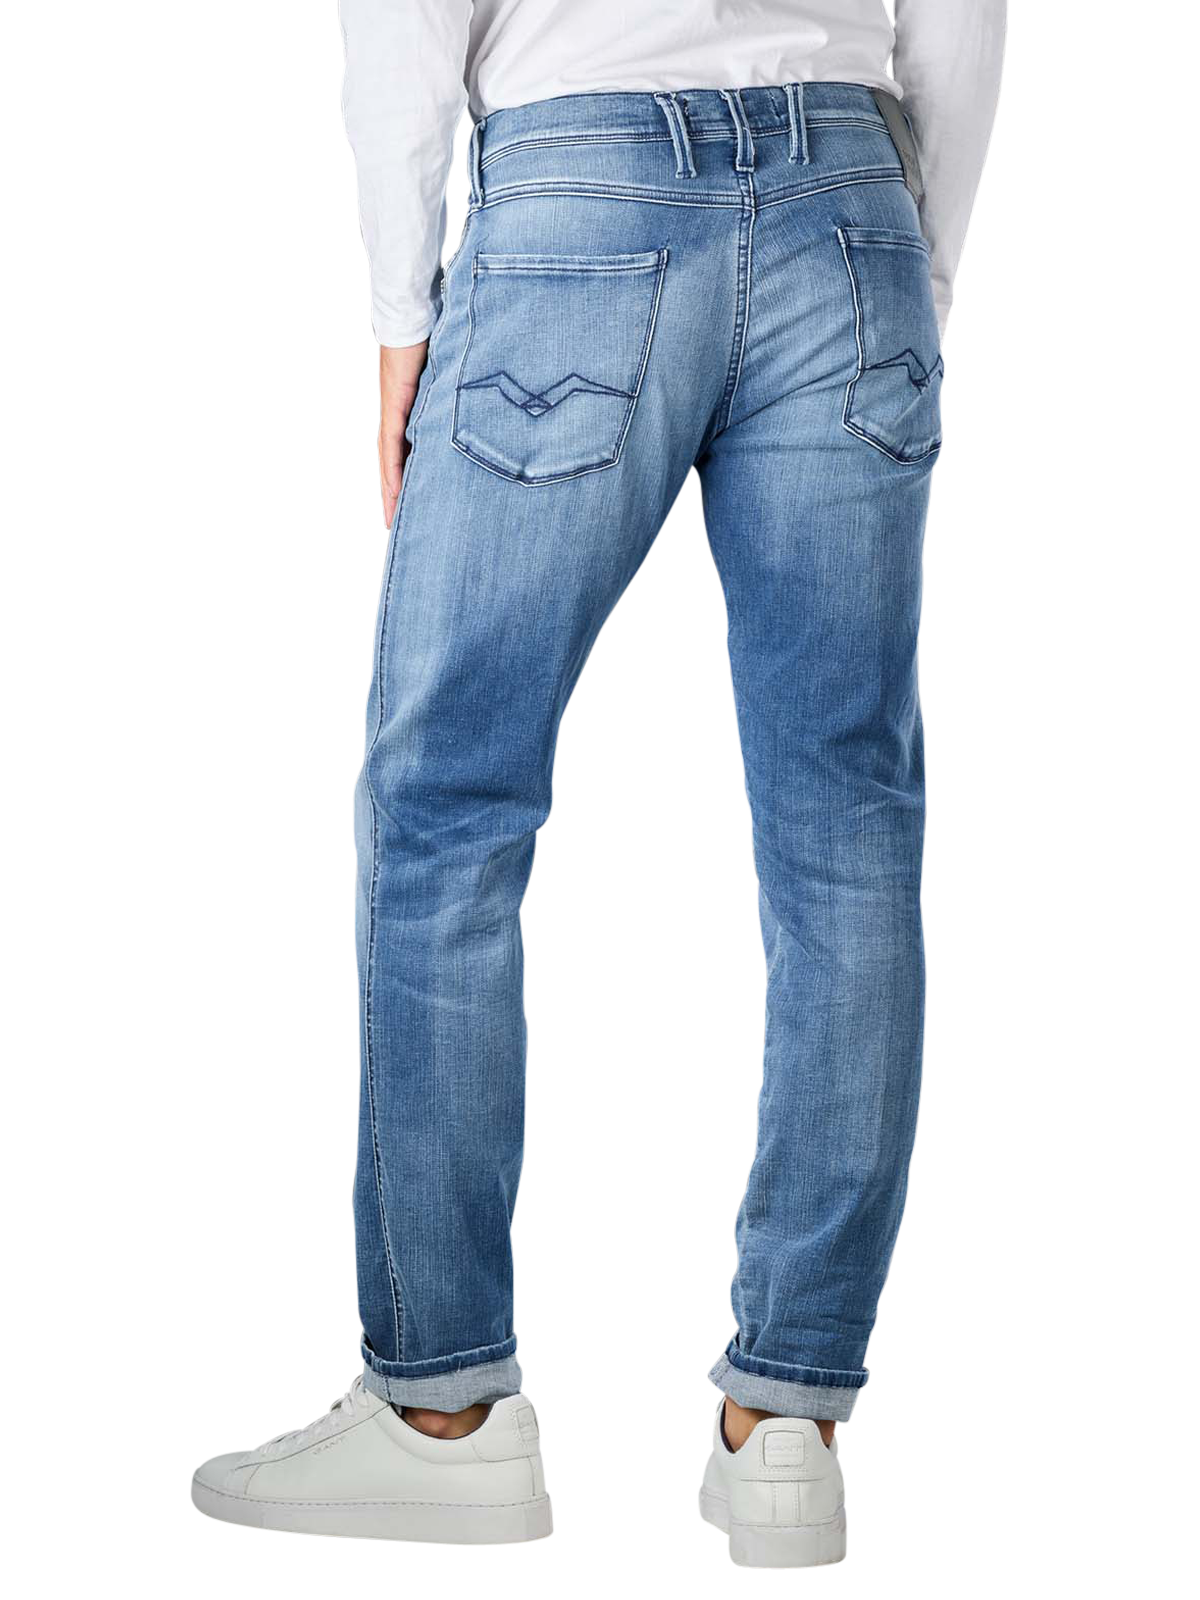 1154-replay-men-jeans-blue-denim-straight-fit-m914y-661-wi6-010-b.png